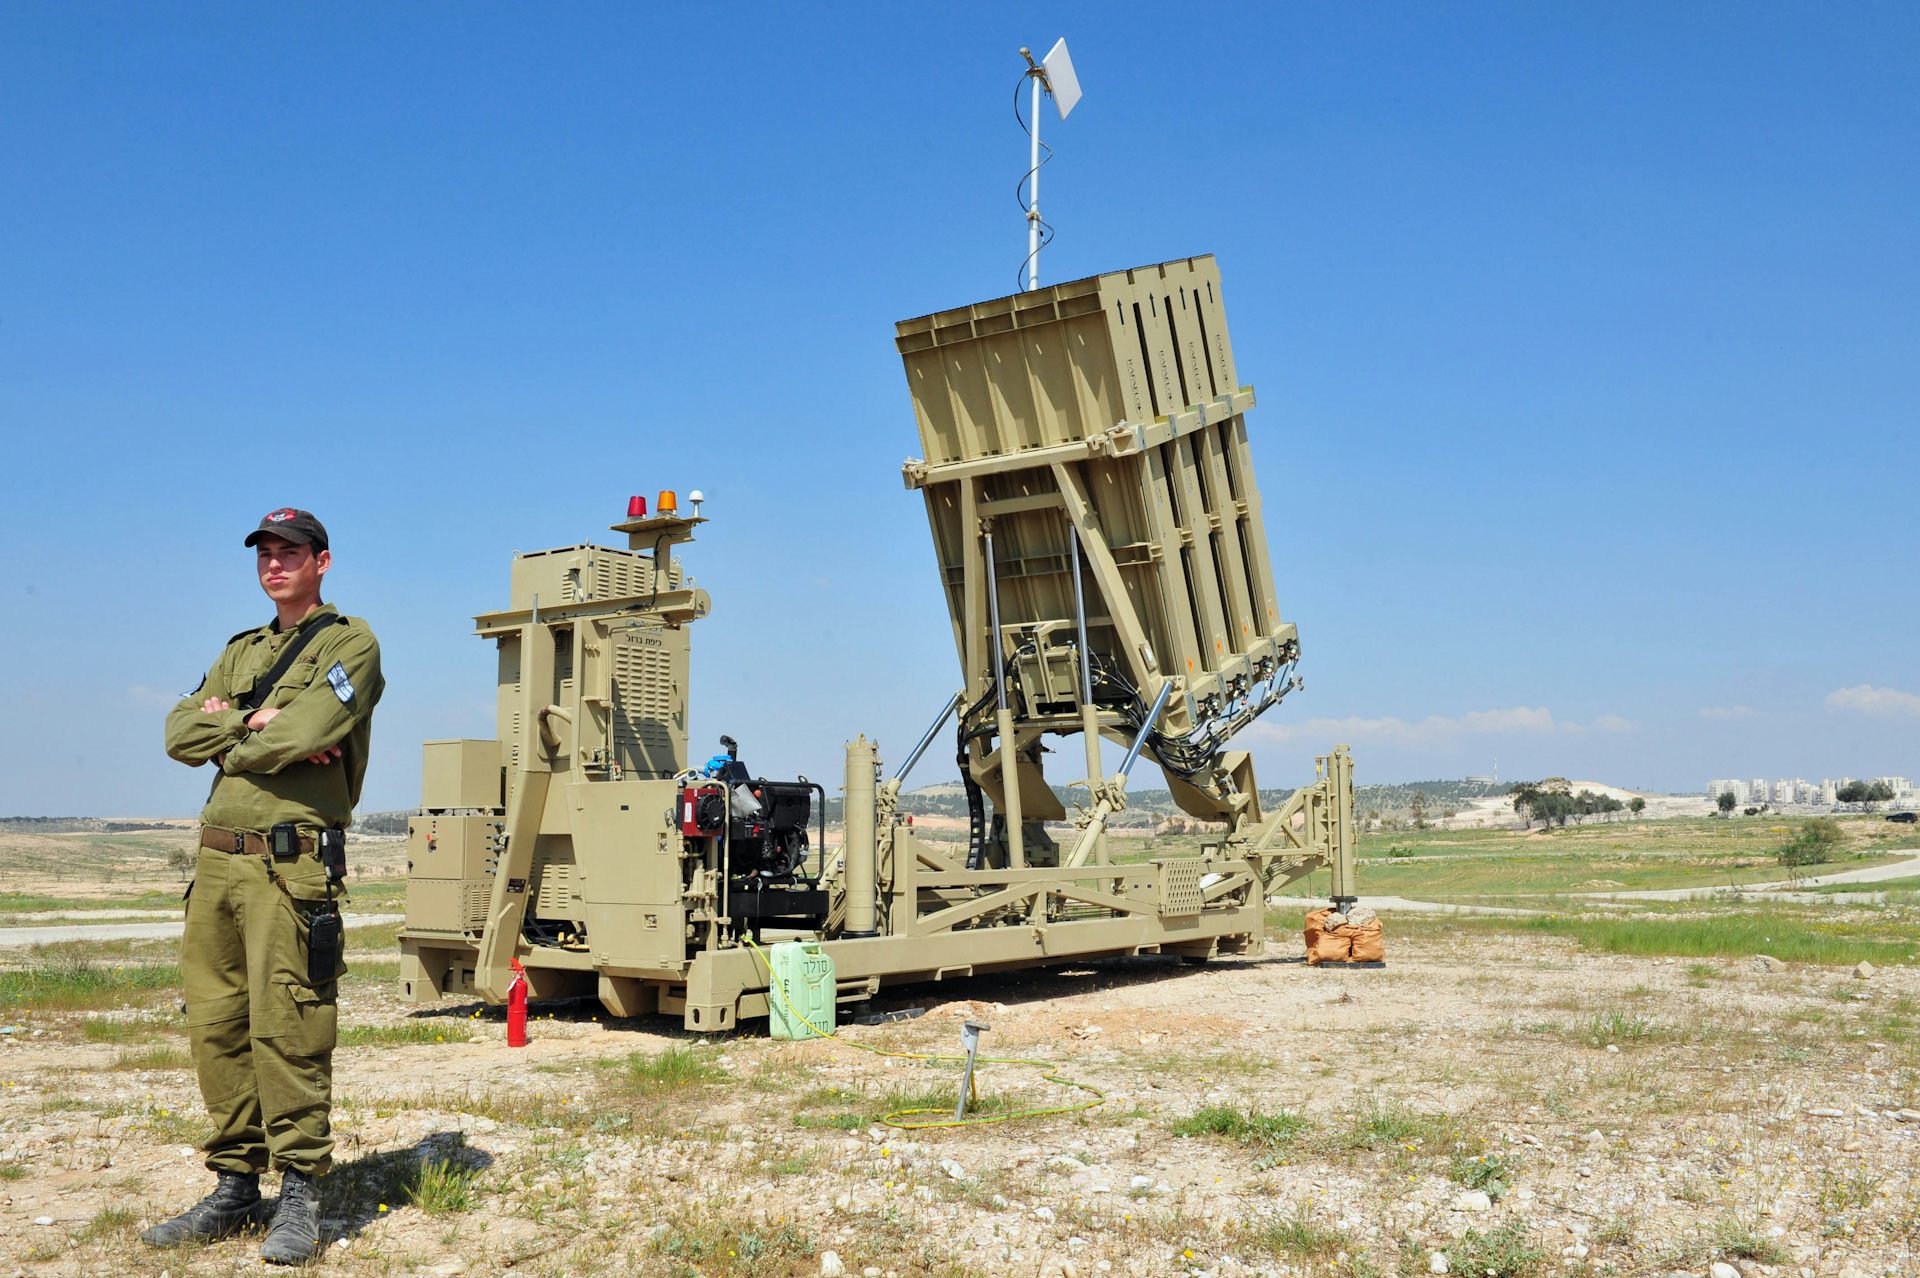 A missle defence system manufactured by Israel